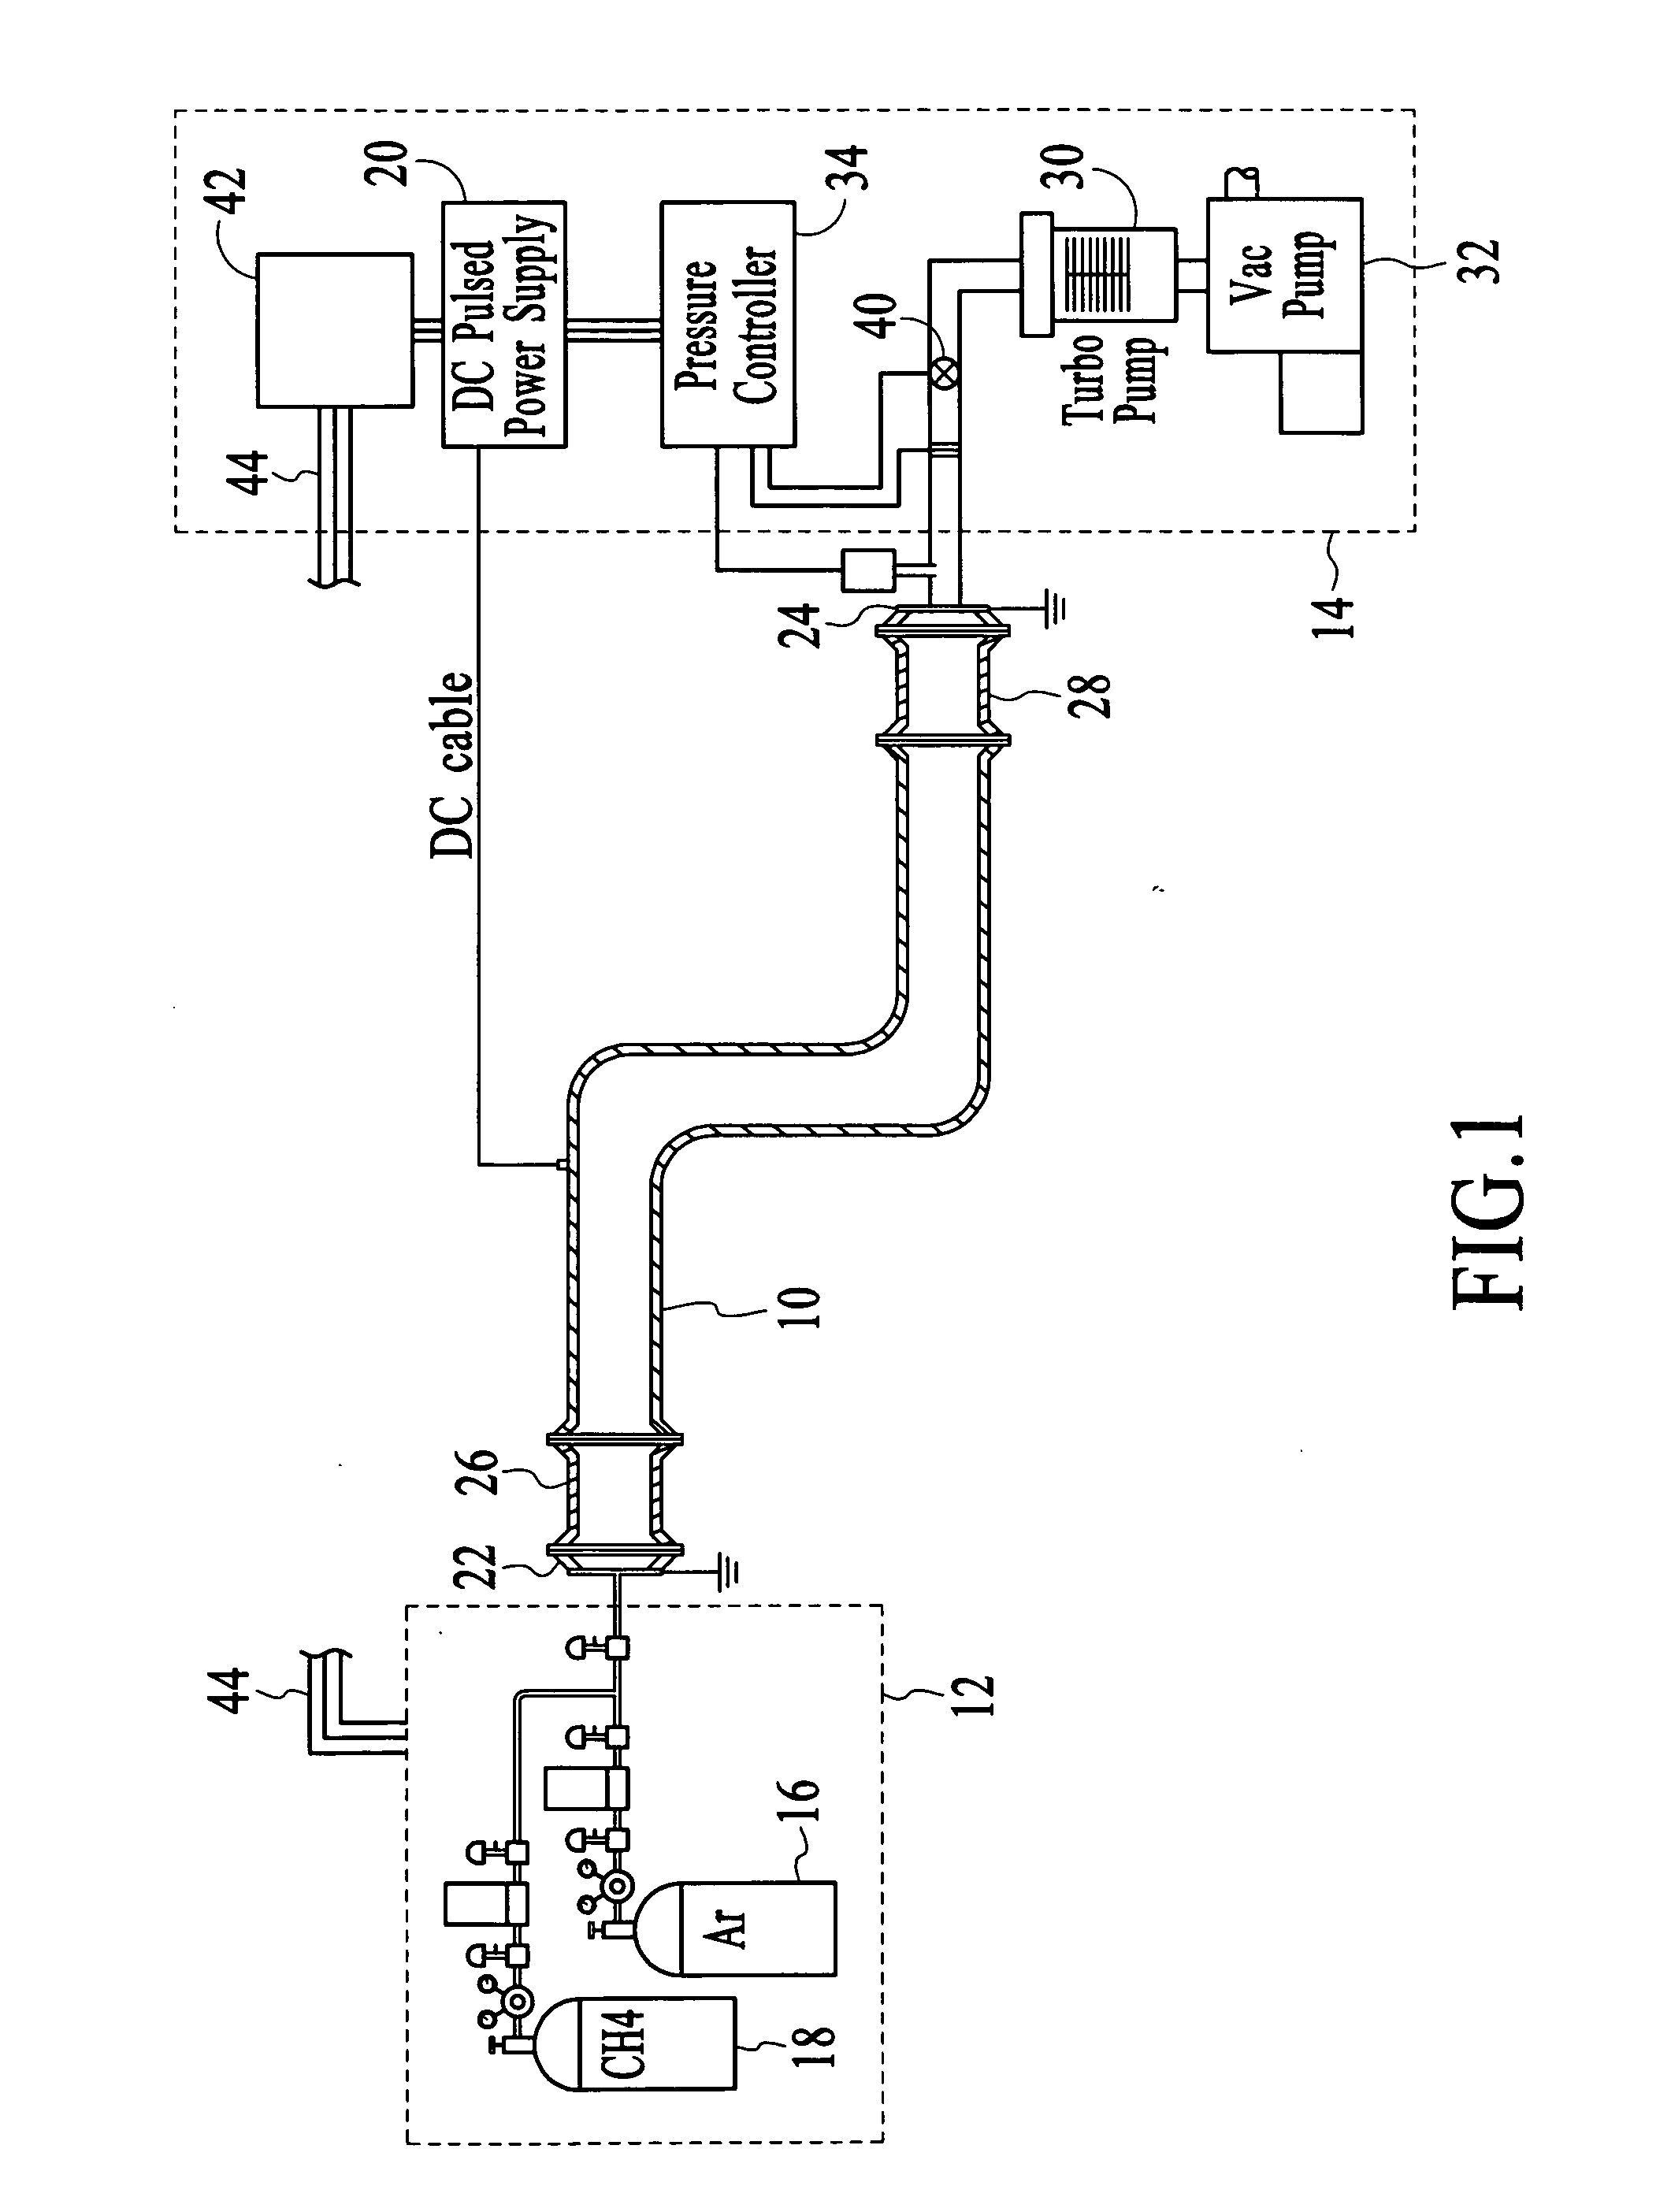 Method and system for coating internal surfaces of prefabricated process piping in the field